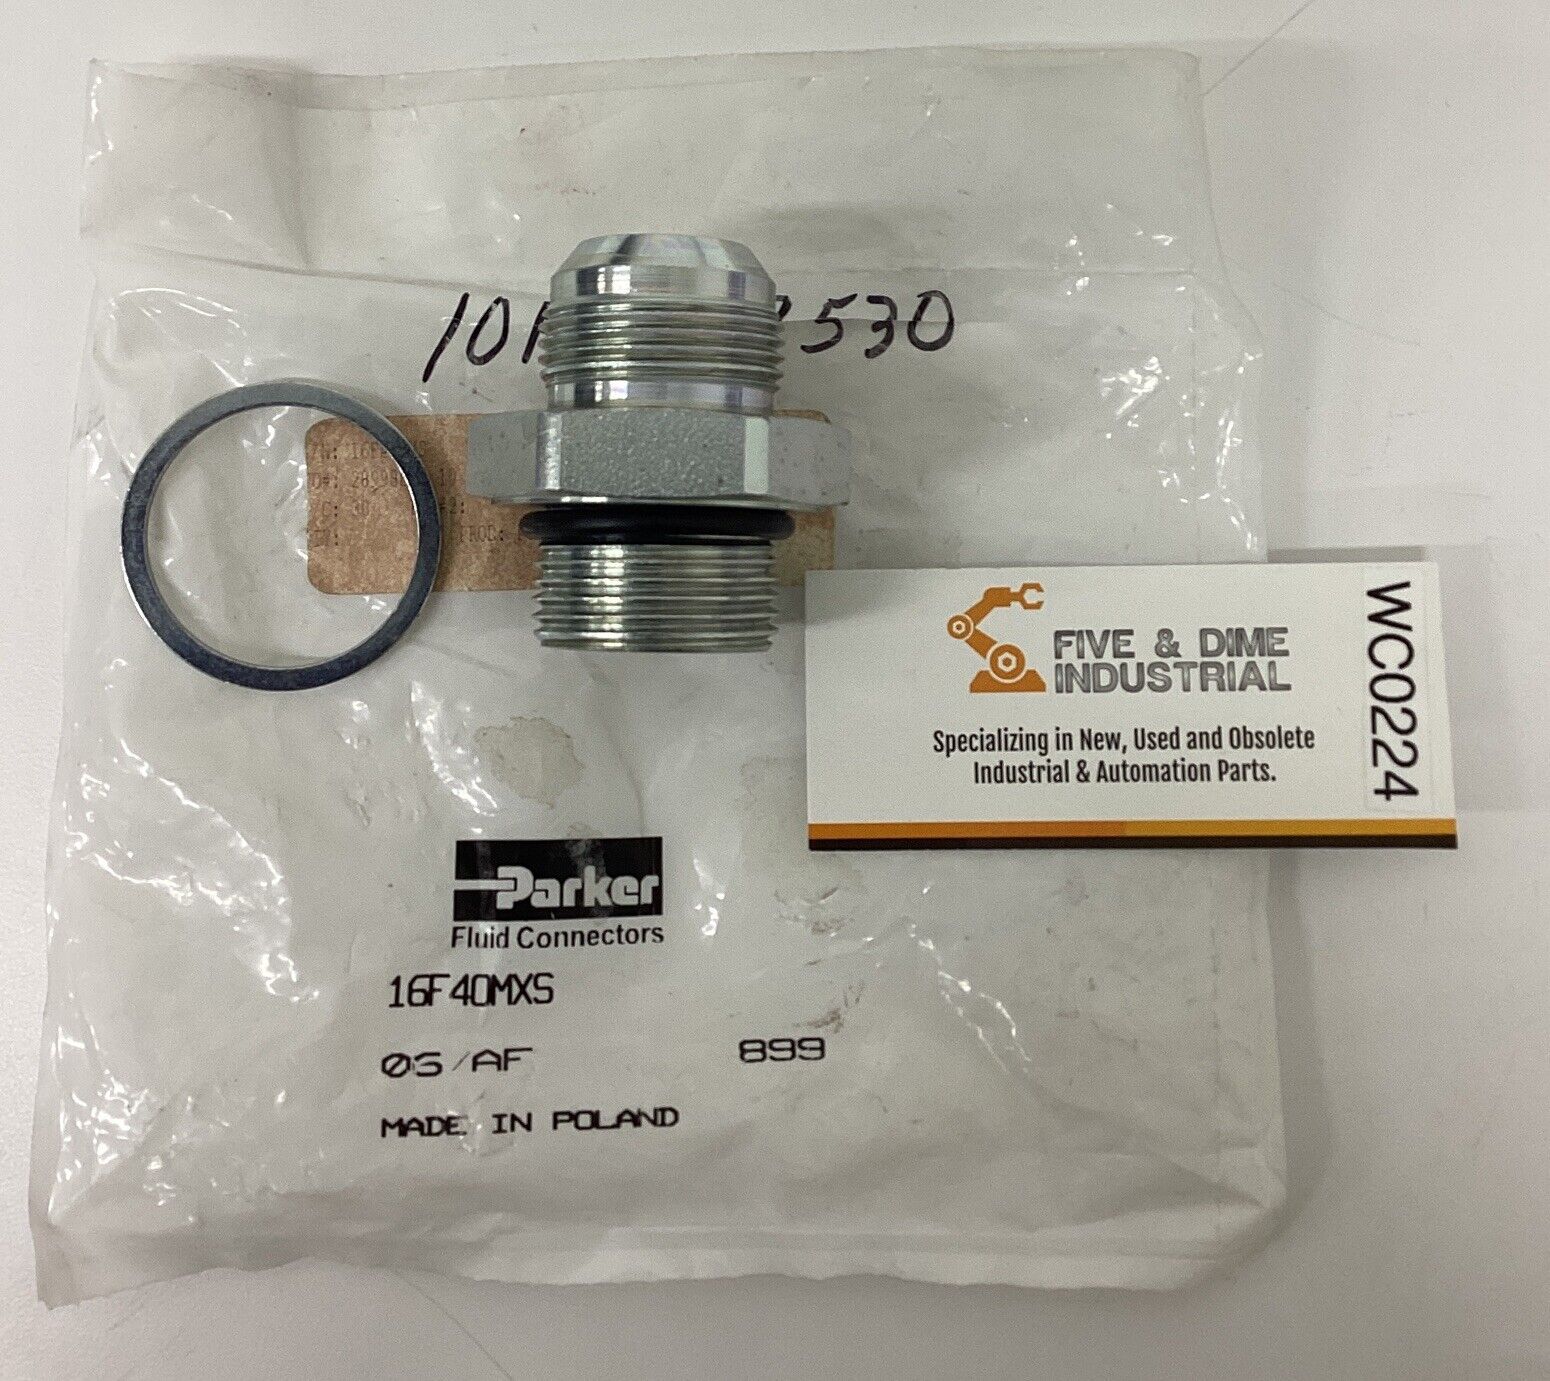 Parker 16F40MXS Hydraulic Fluid Connector (BL277)